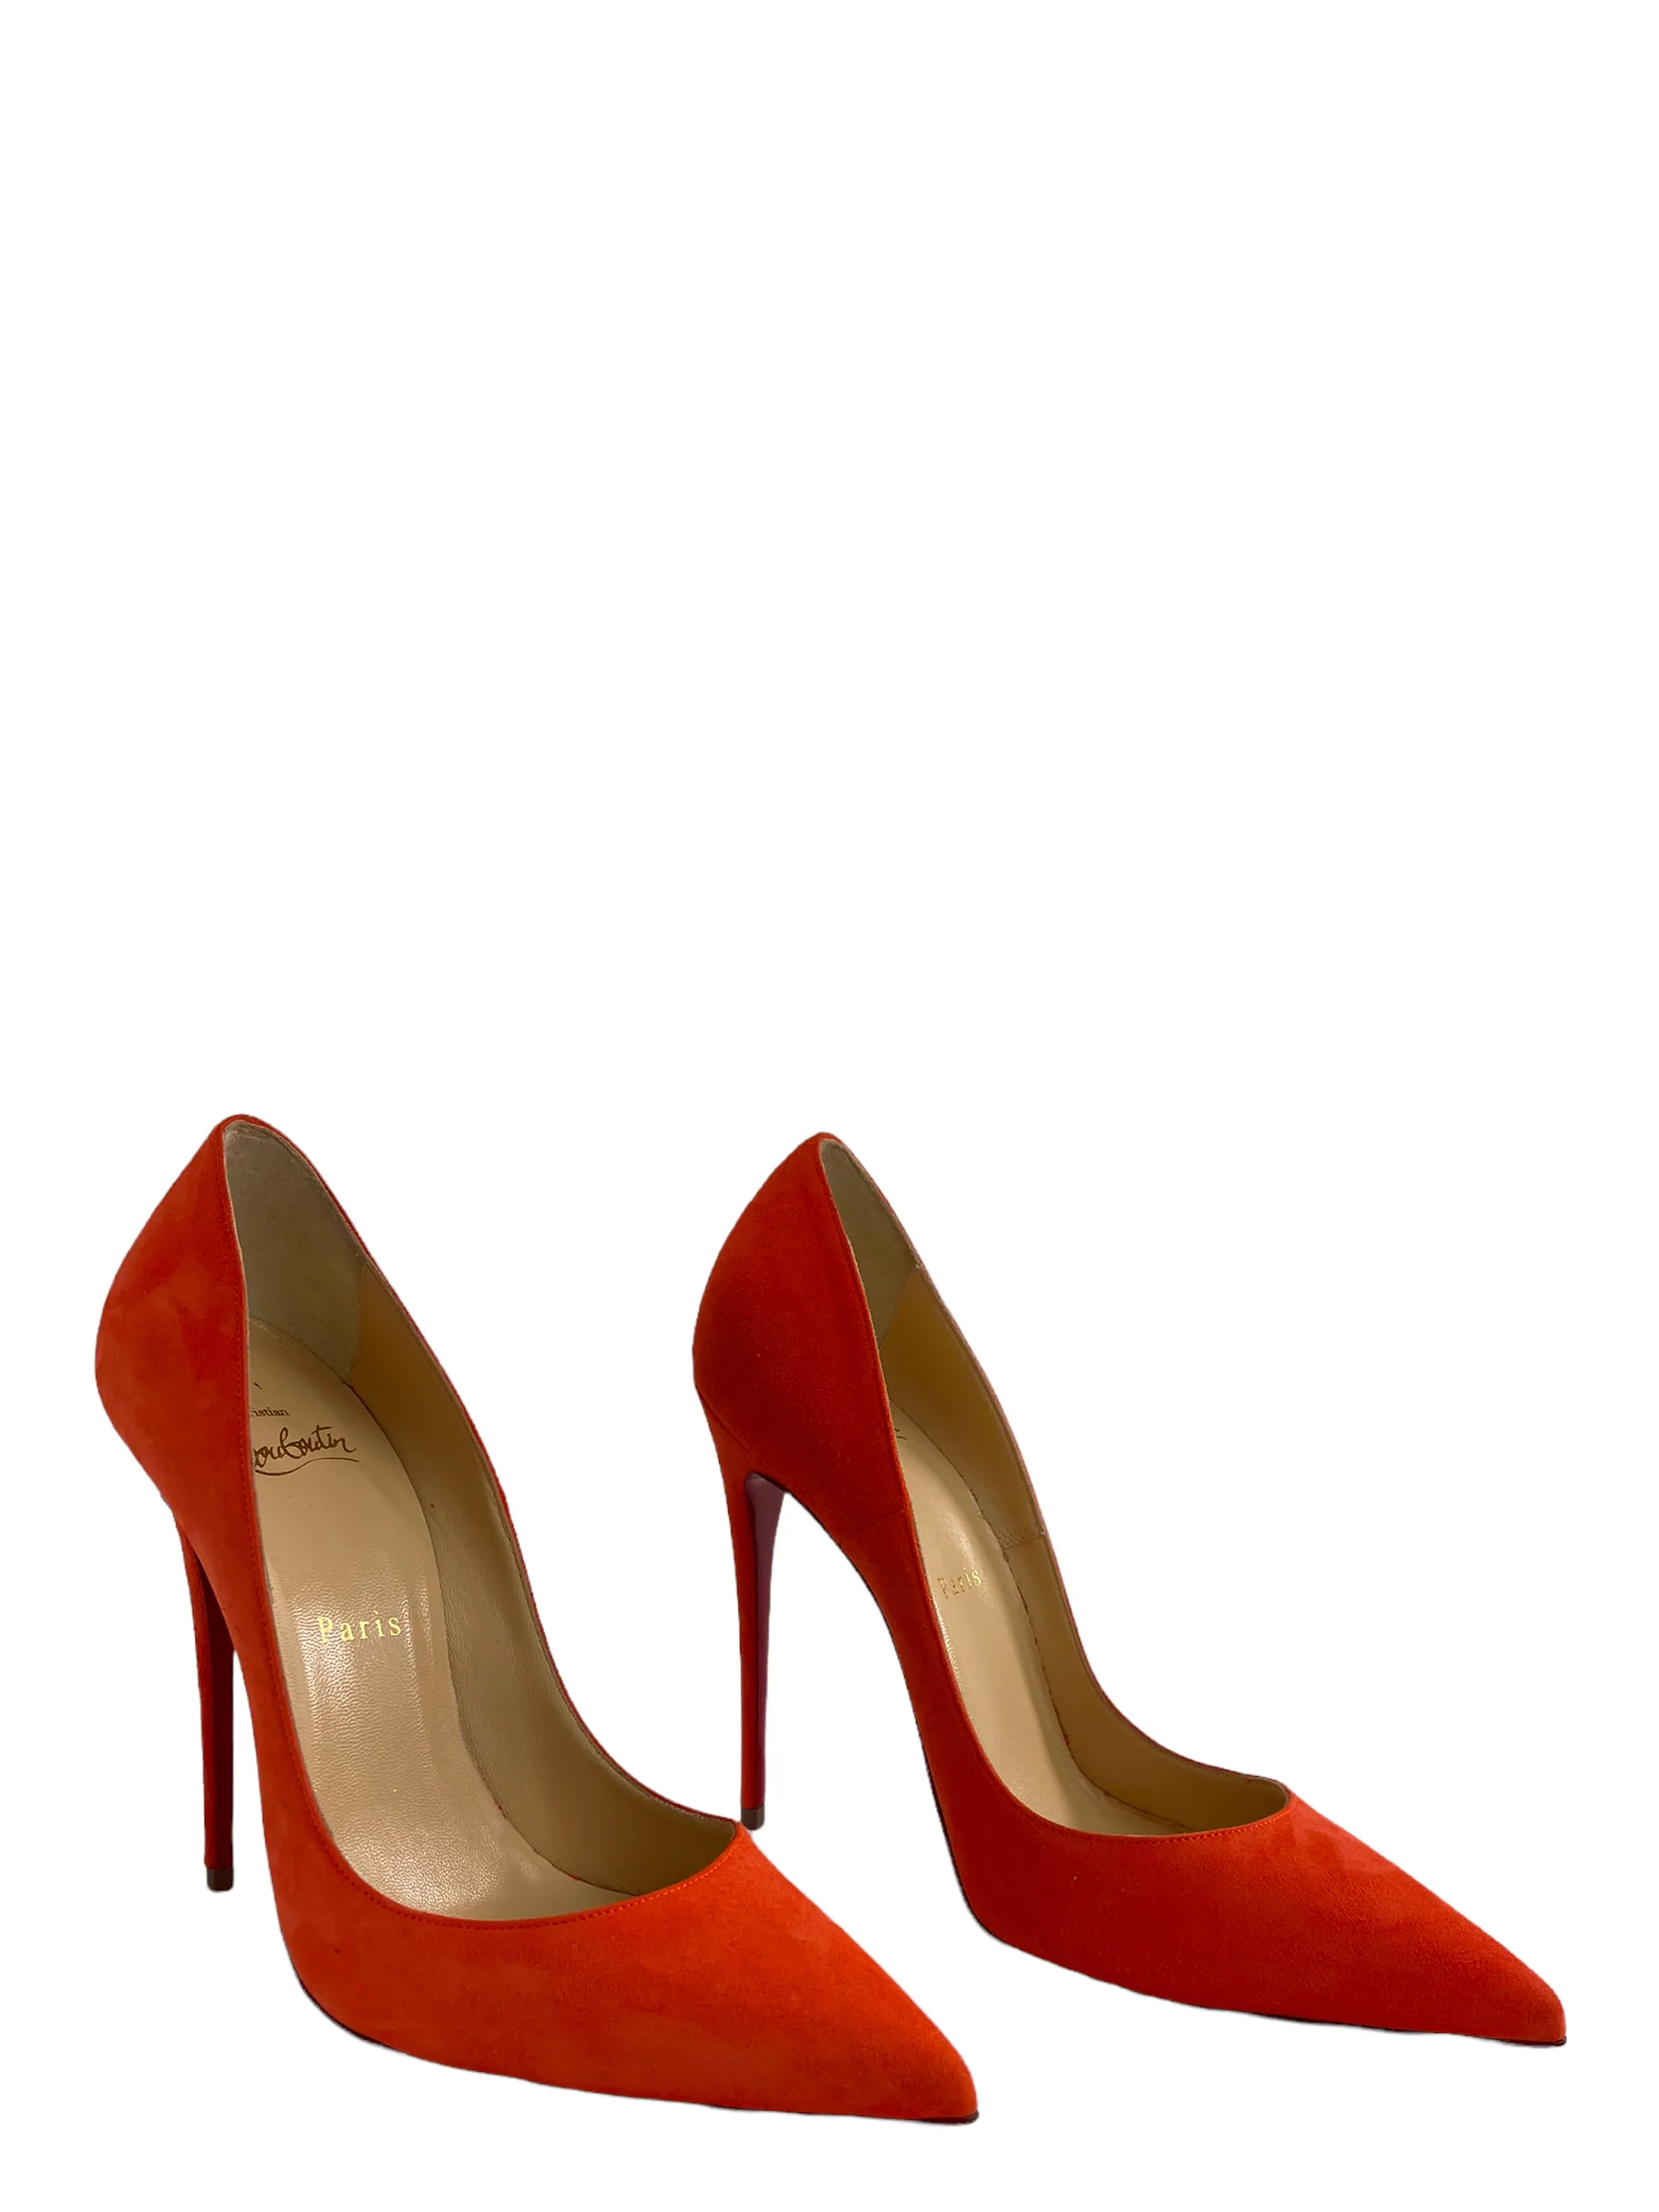 Christian Louboutin Orange Suede 120 High Heels €249 Limited Edition